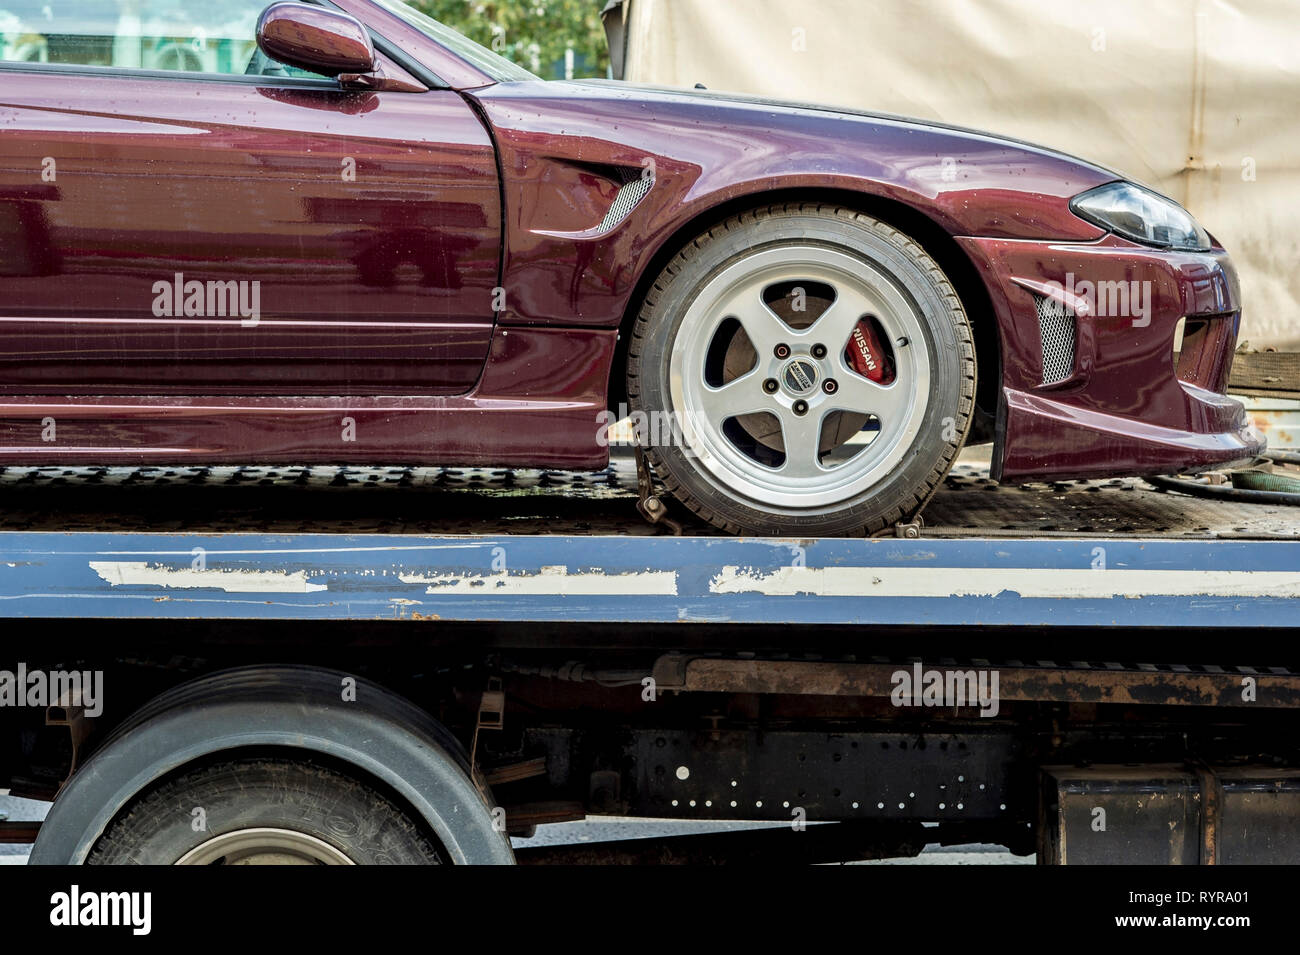 Tow trucks after the accident transports the car brand Nissan Russia, St. Petersburg, September 2018. Sharpness on the headlights of a Burgundy car. B Stock Photo